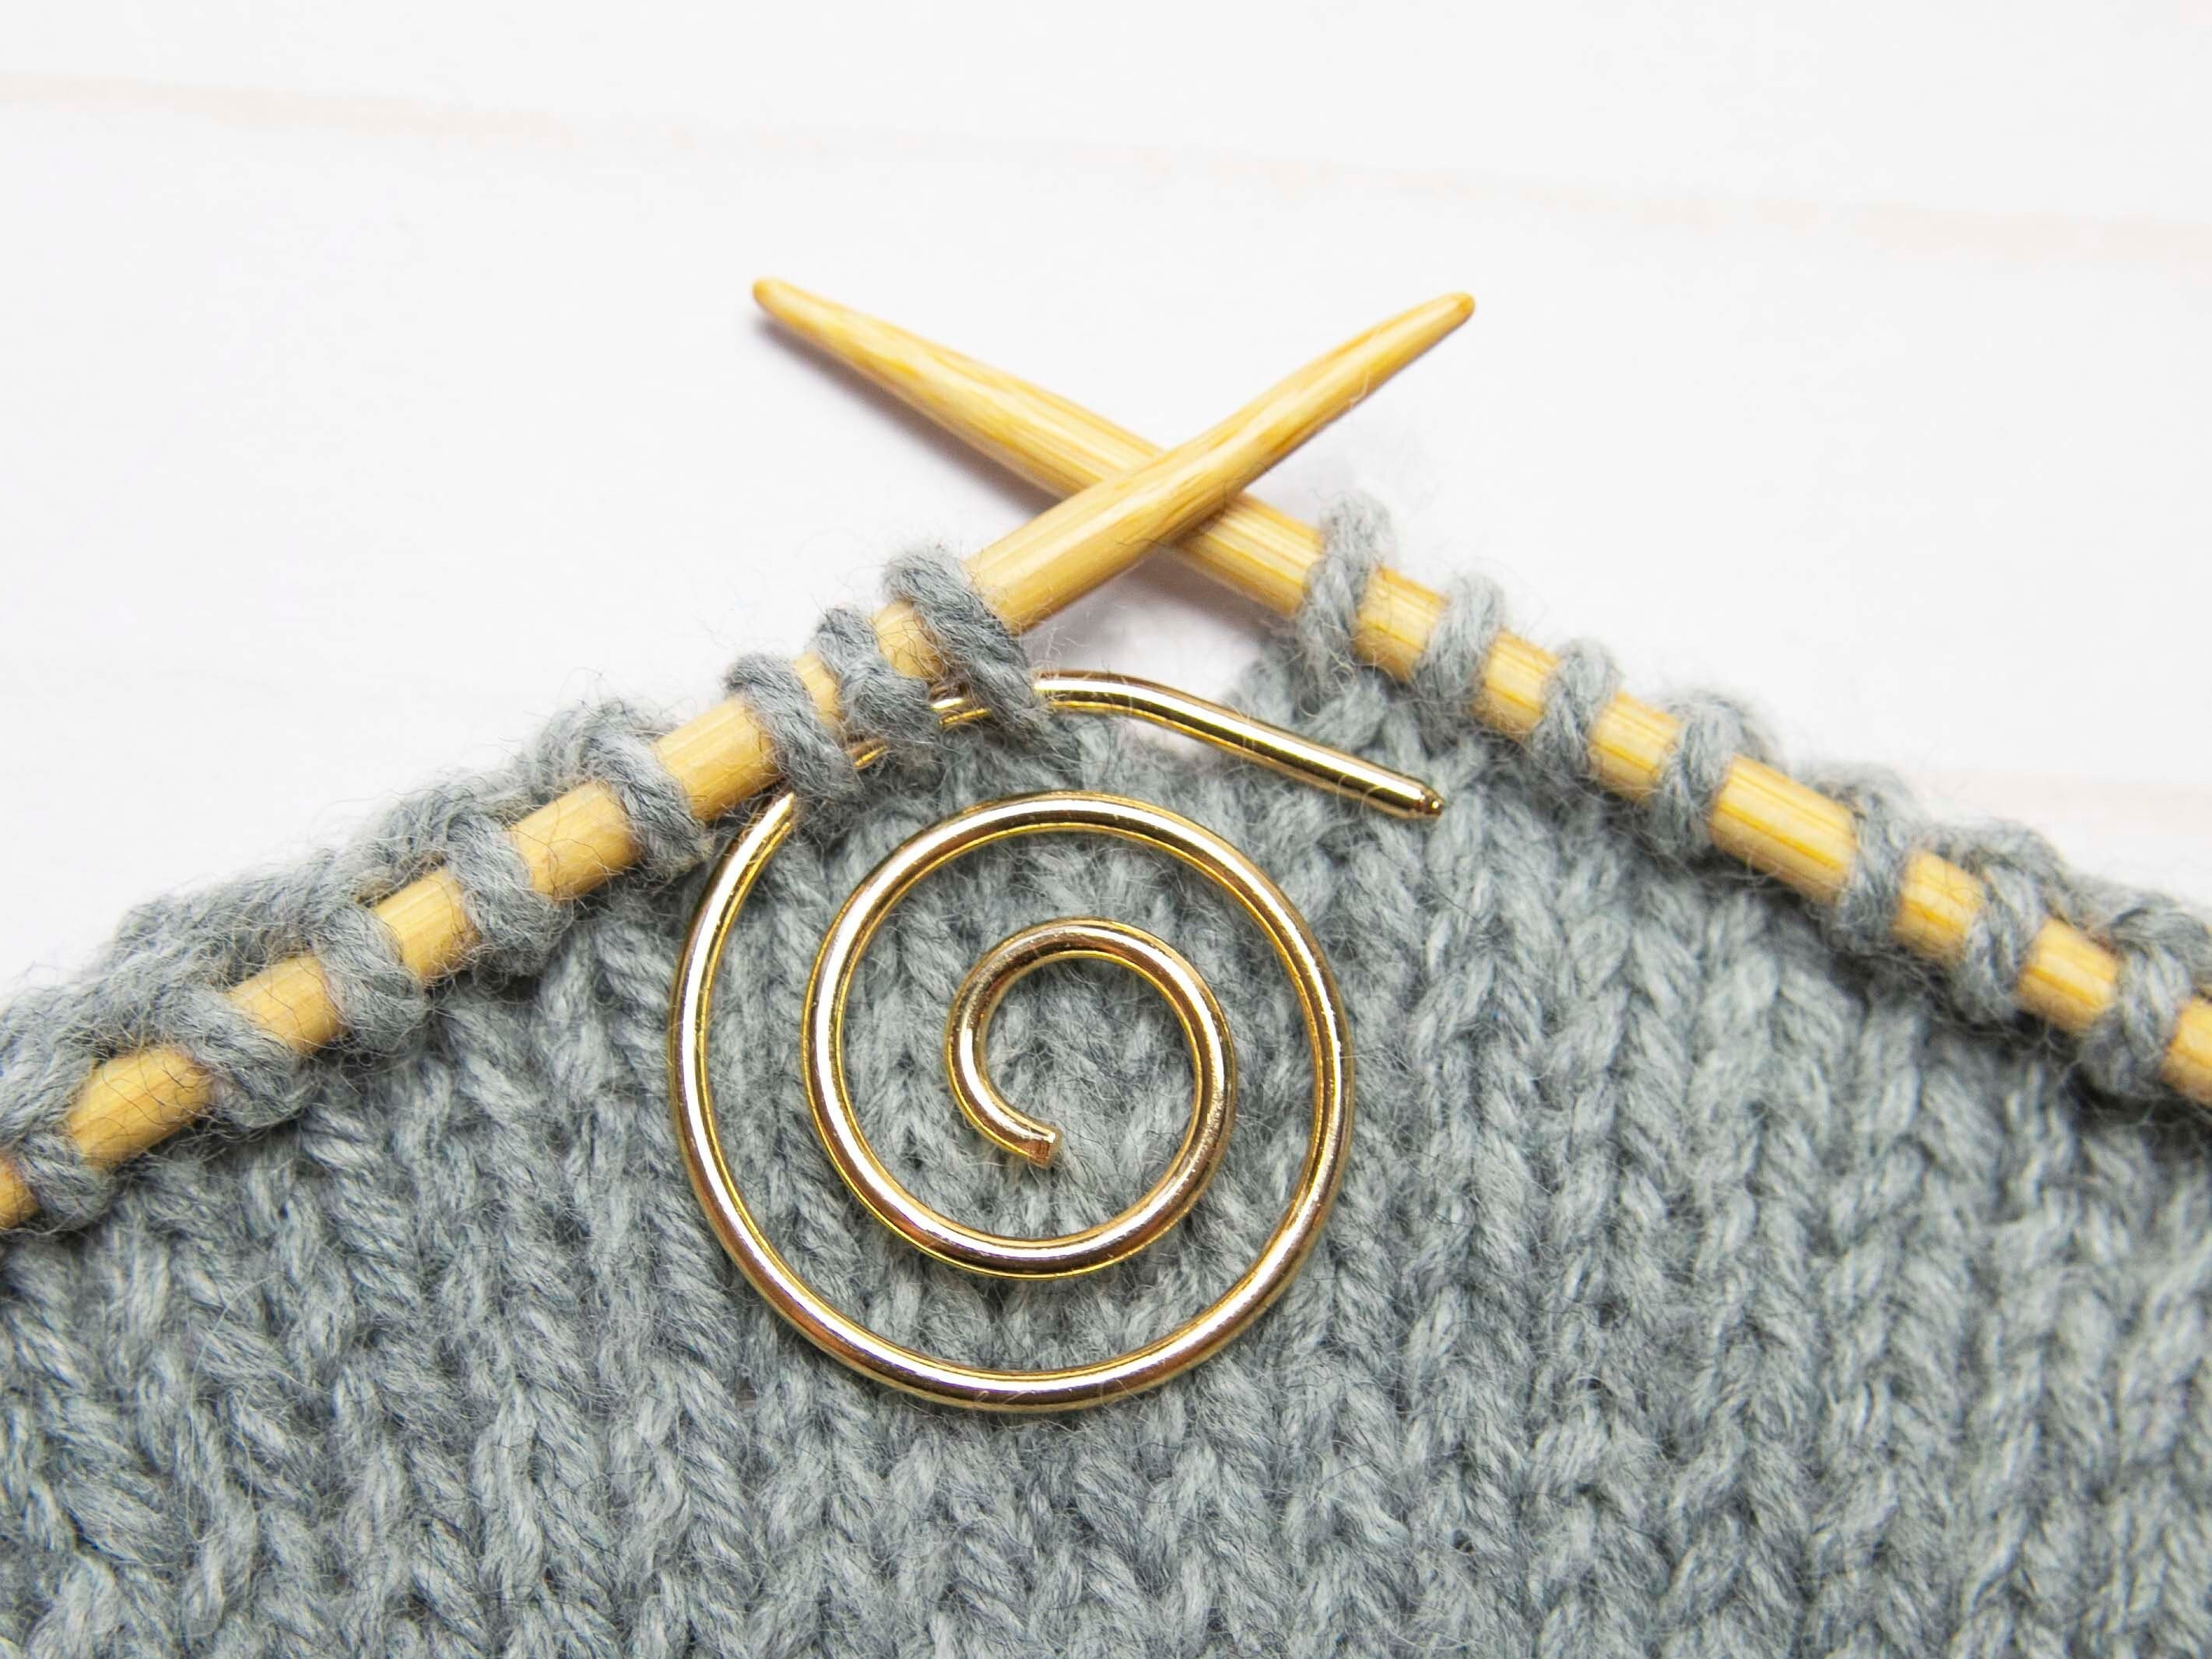 Spiral Knit Pin, Stitch Keeper, Arthritis Ring, Crochet Gift, Knitting Gifts,  Yarn Guide, Stitch Keeper, Gifts for Her, Christmas Gift Ideas 